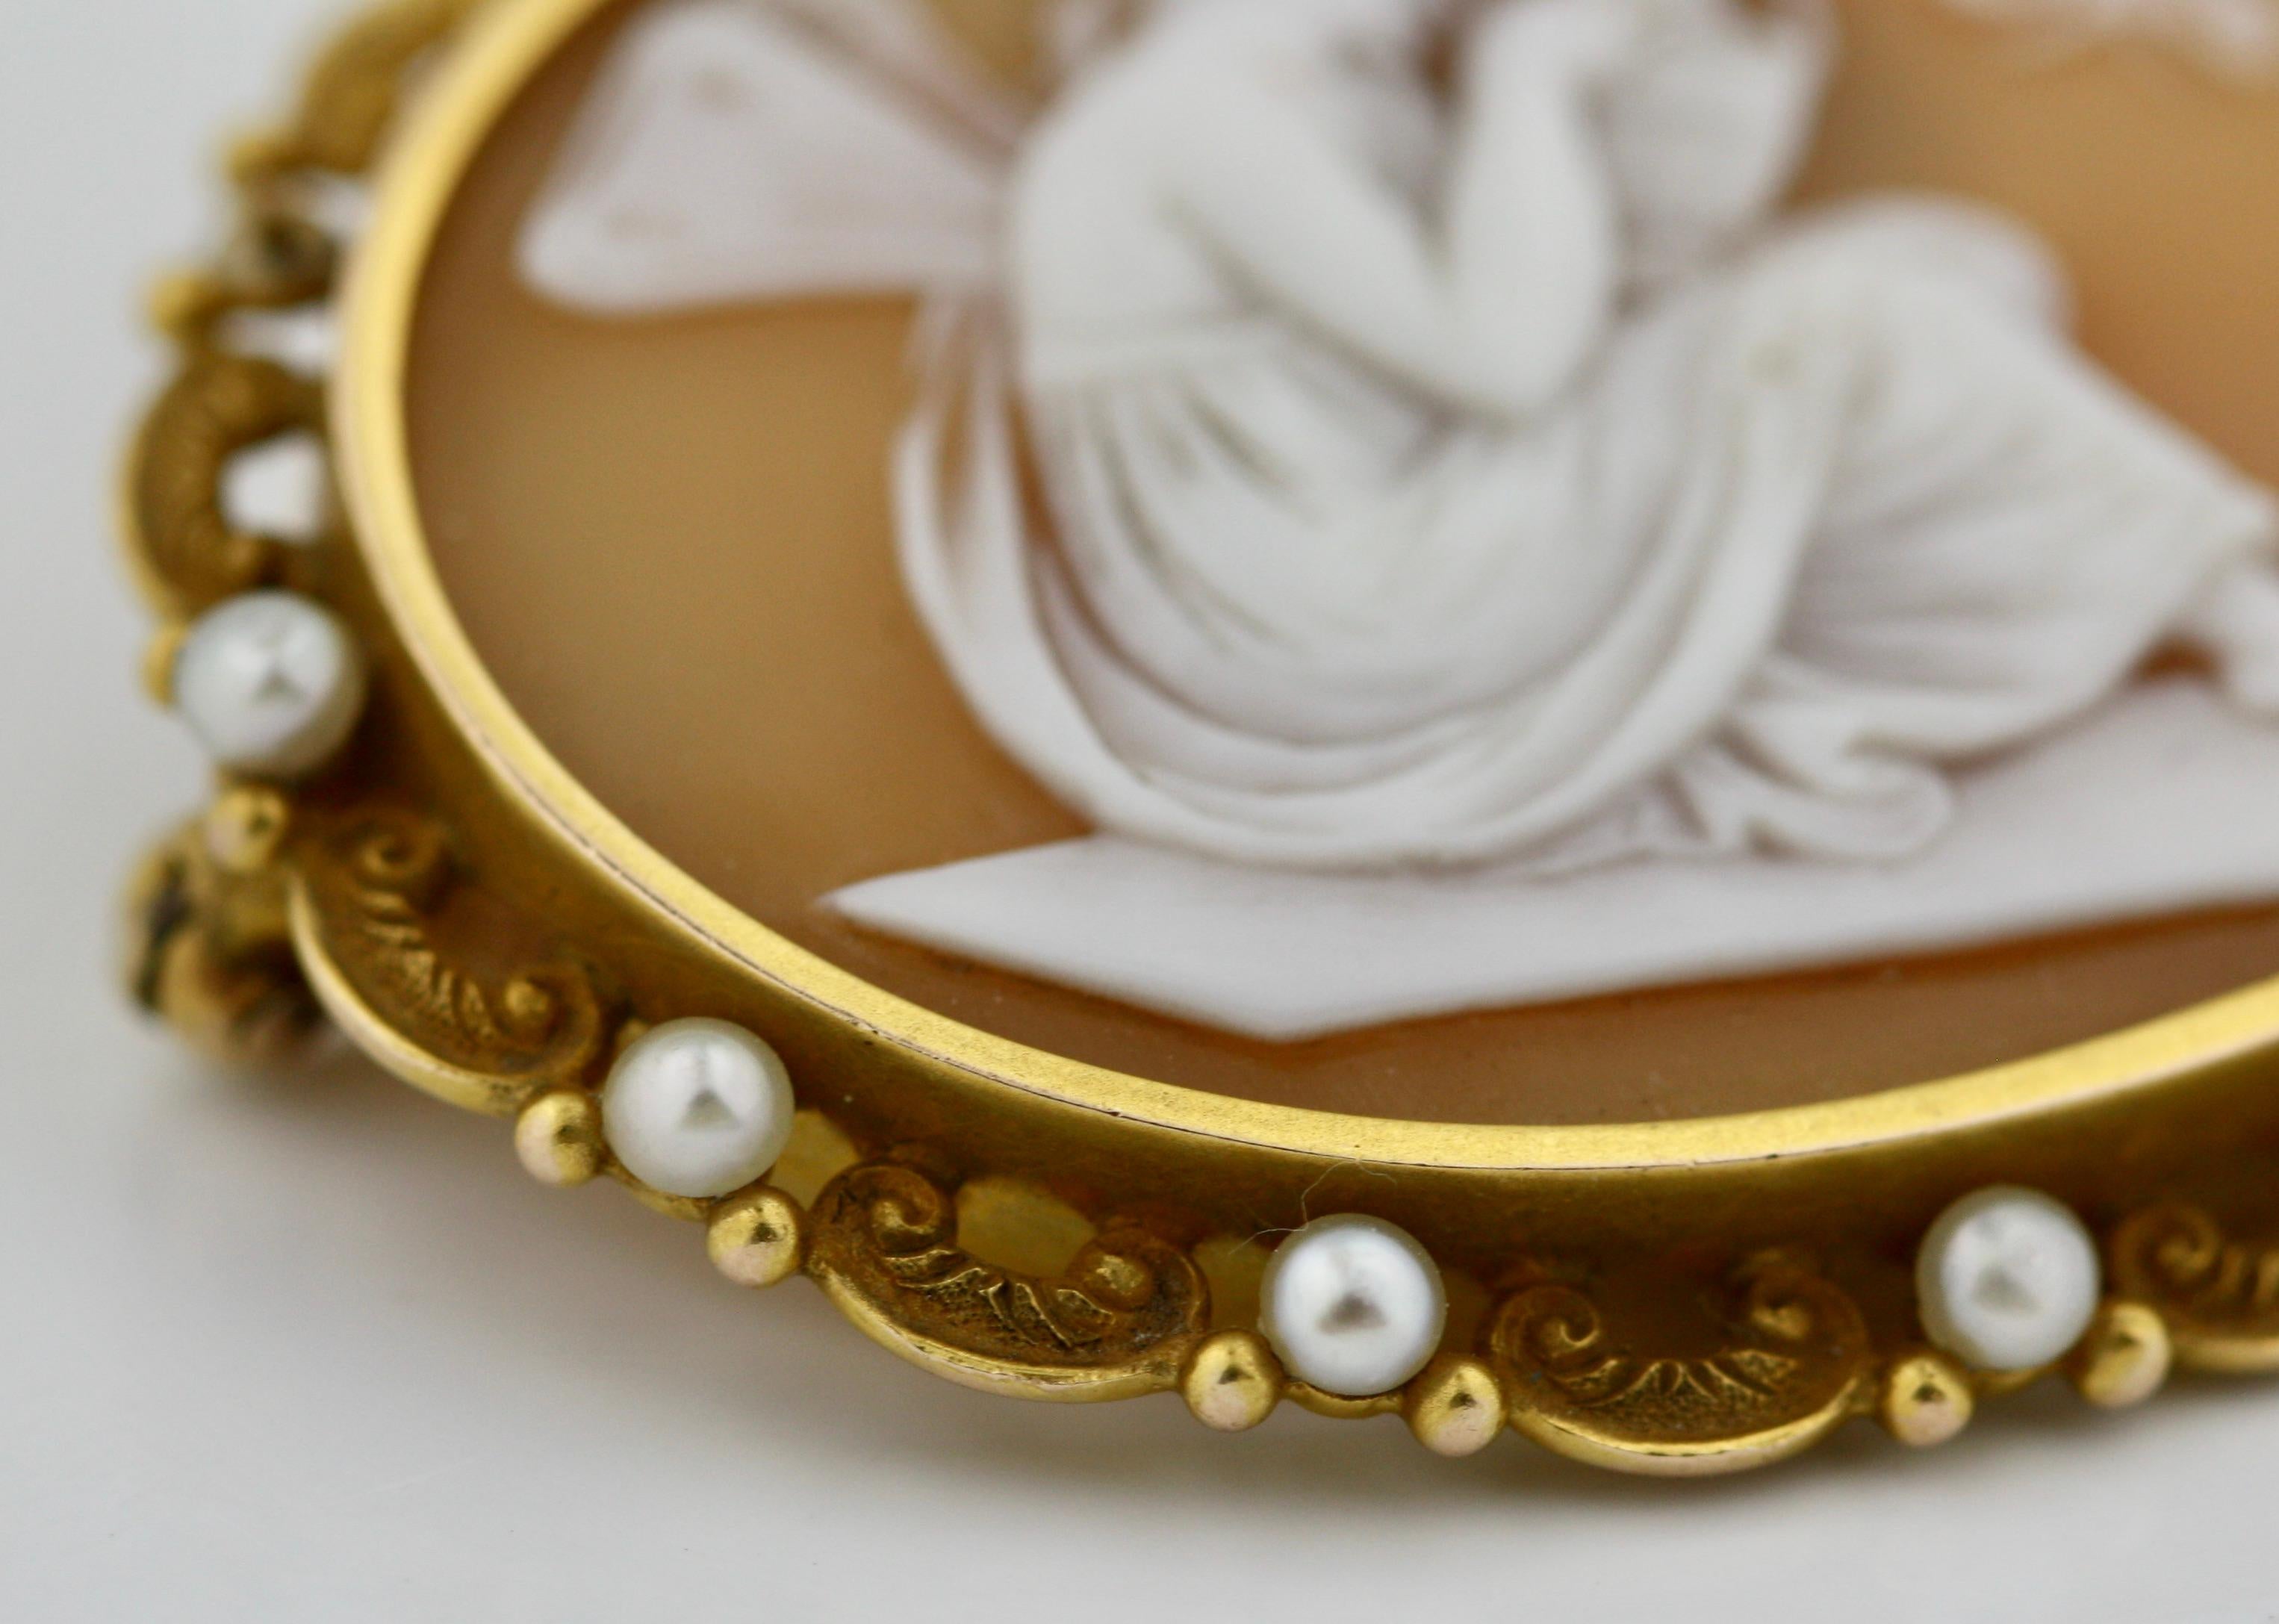 
Shell cameo brooch
Depicting a young nymph, surrounded by gold and 11 seed pearls one missing, measuring approximately 42 x 35mm, French import assay mark for 18 karat gold, gross weight 9.41 grams